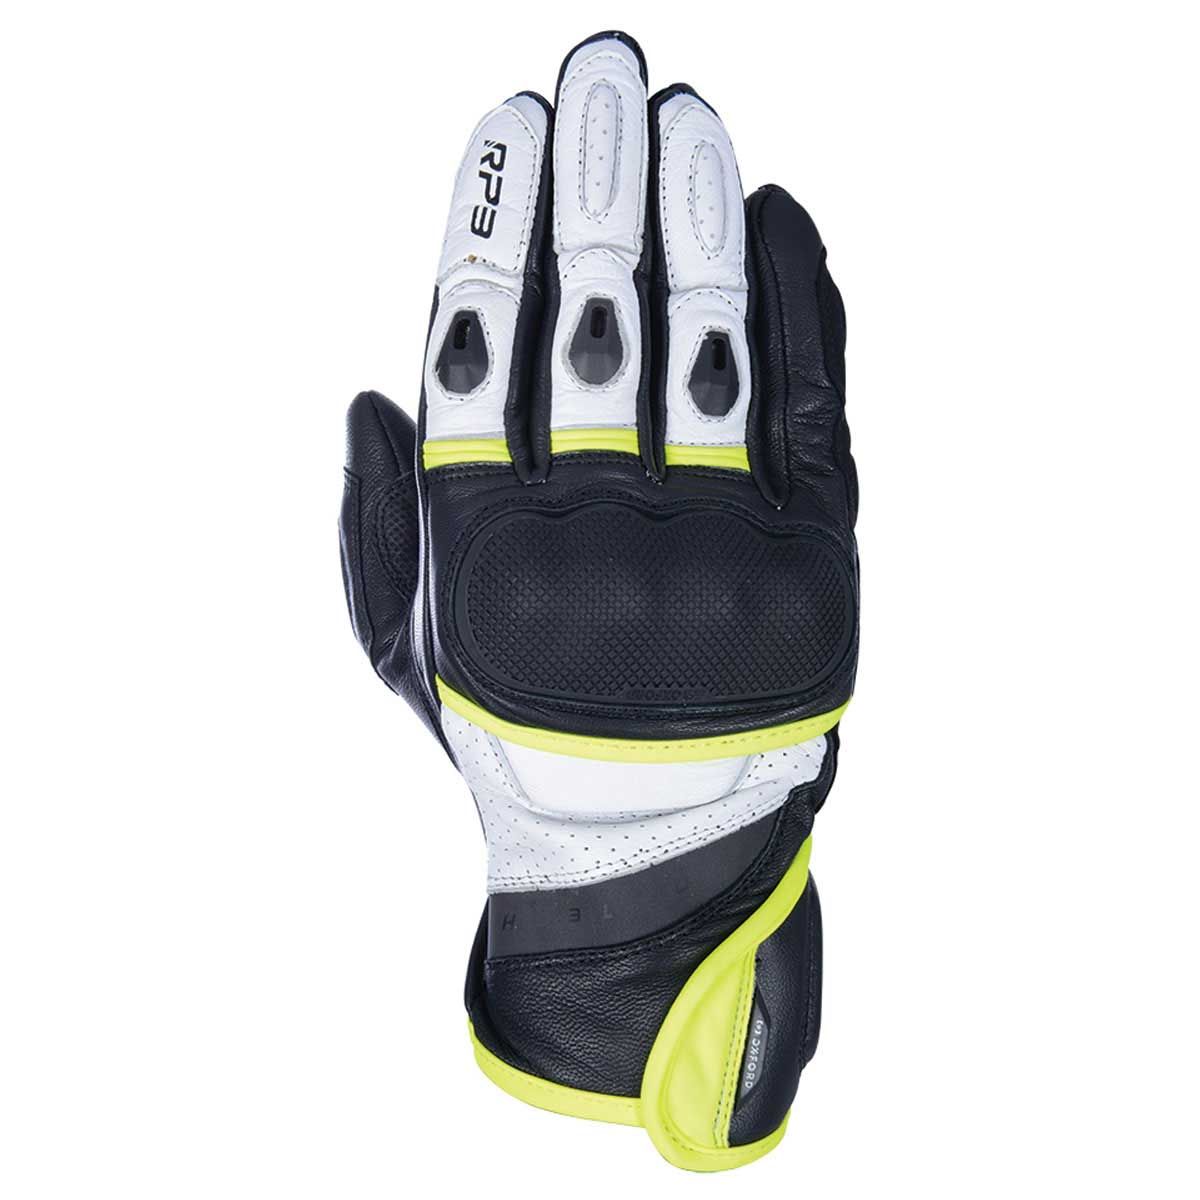 Oxford RP 3 2.0 Sports Short Leather Gloves Black / White / Fluo Yellow